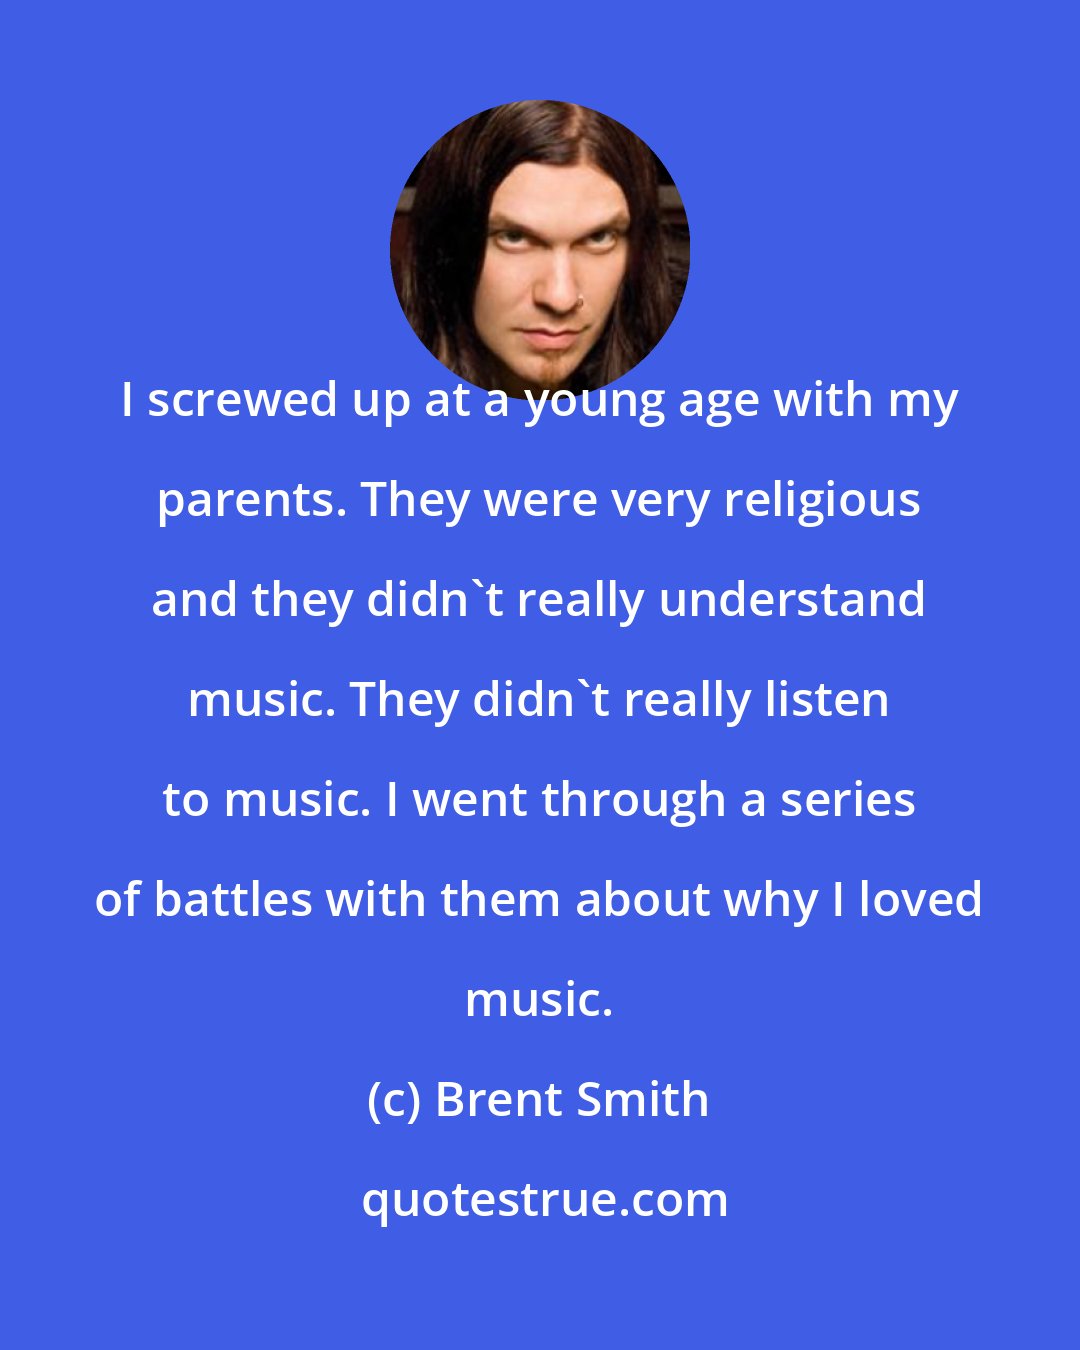 Brent Smith: I screwed up at a young age with my parents. They were very religious and they didn't really understand music. They didn't really listen to music. I went through a series of battles with them about why I loved music.